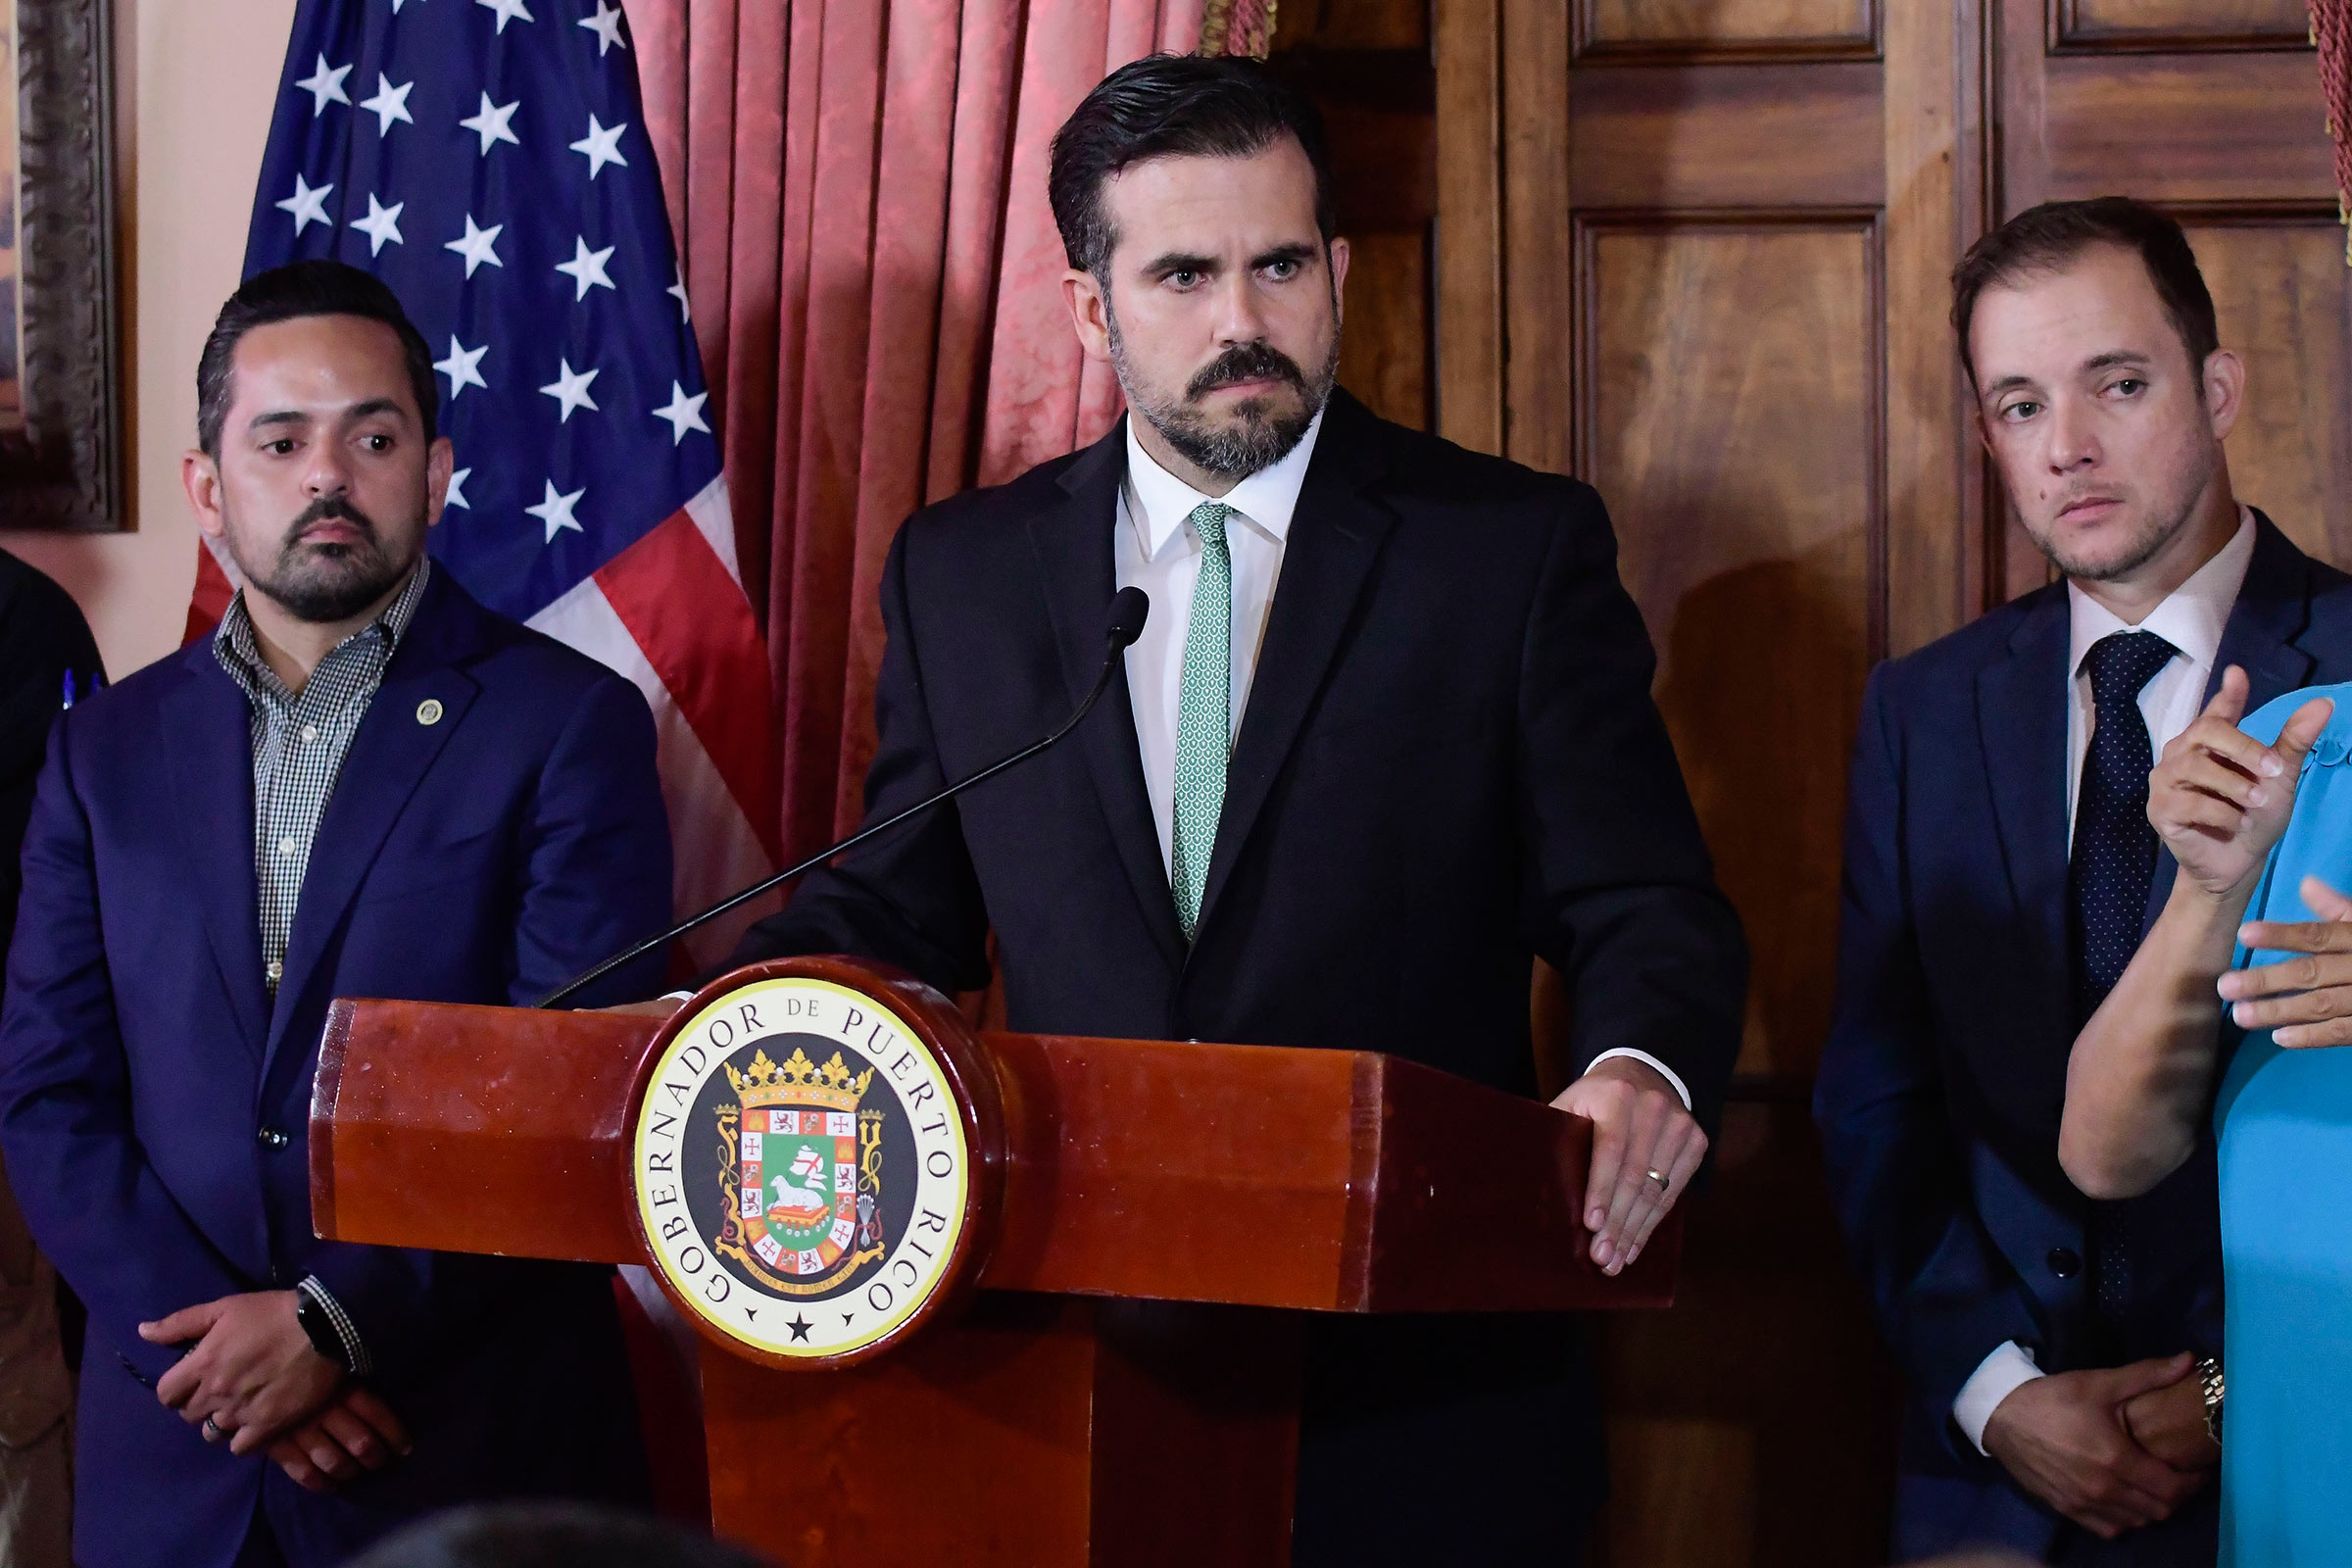 Governor Rosselló at a press conference on his administration’s scandal on July 16. (Carlos Giusti—AP)